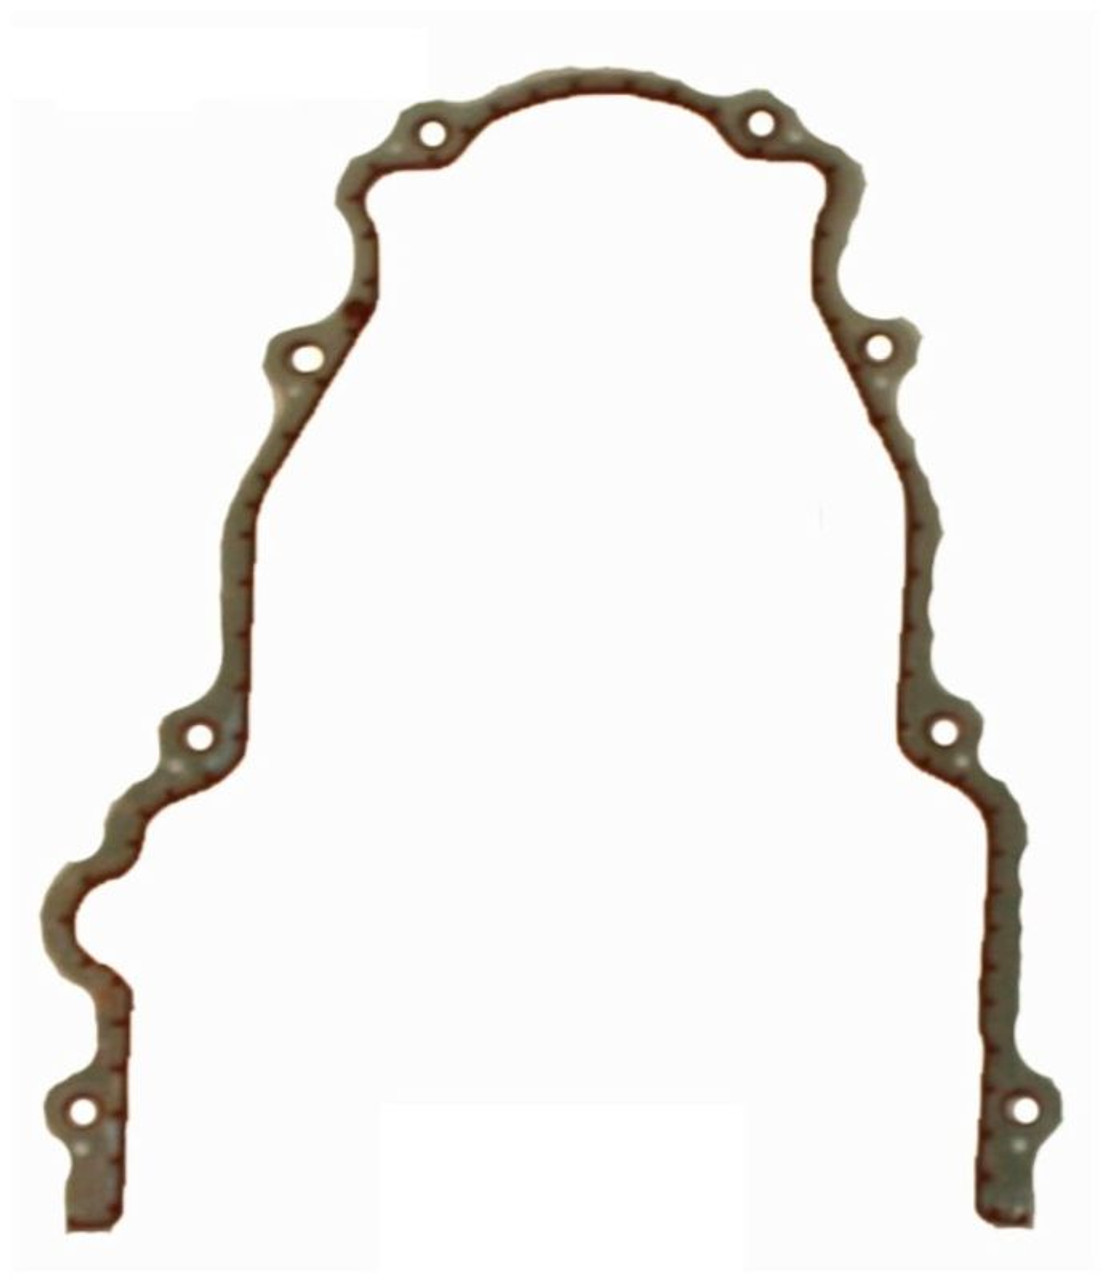 2009 Chevrolet Express 3500 4.8L Engine Timing Cover Gasket TCG293-A -557